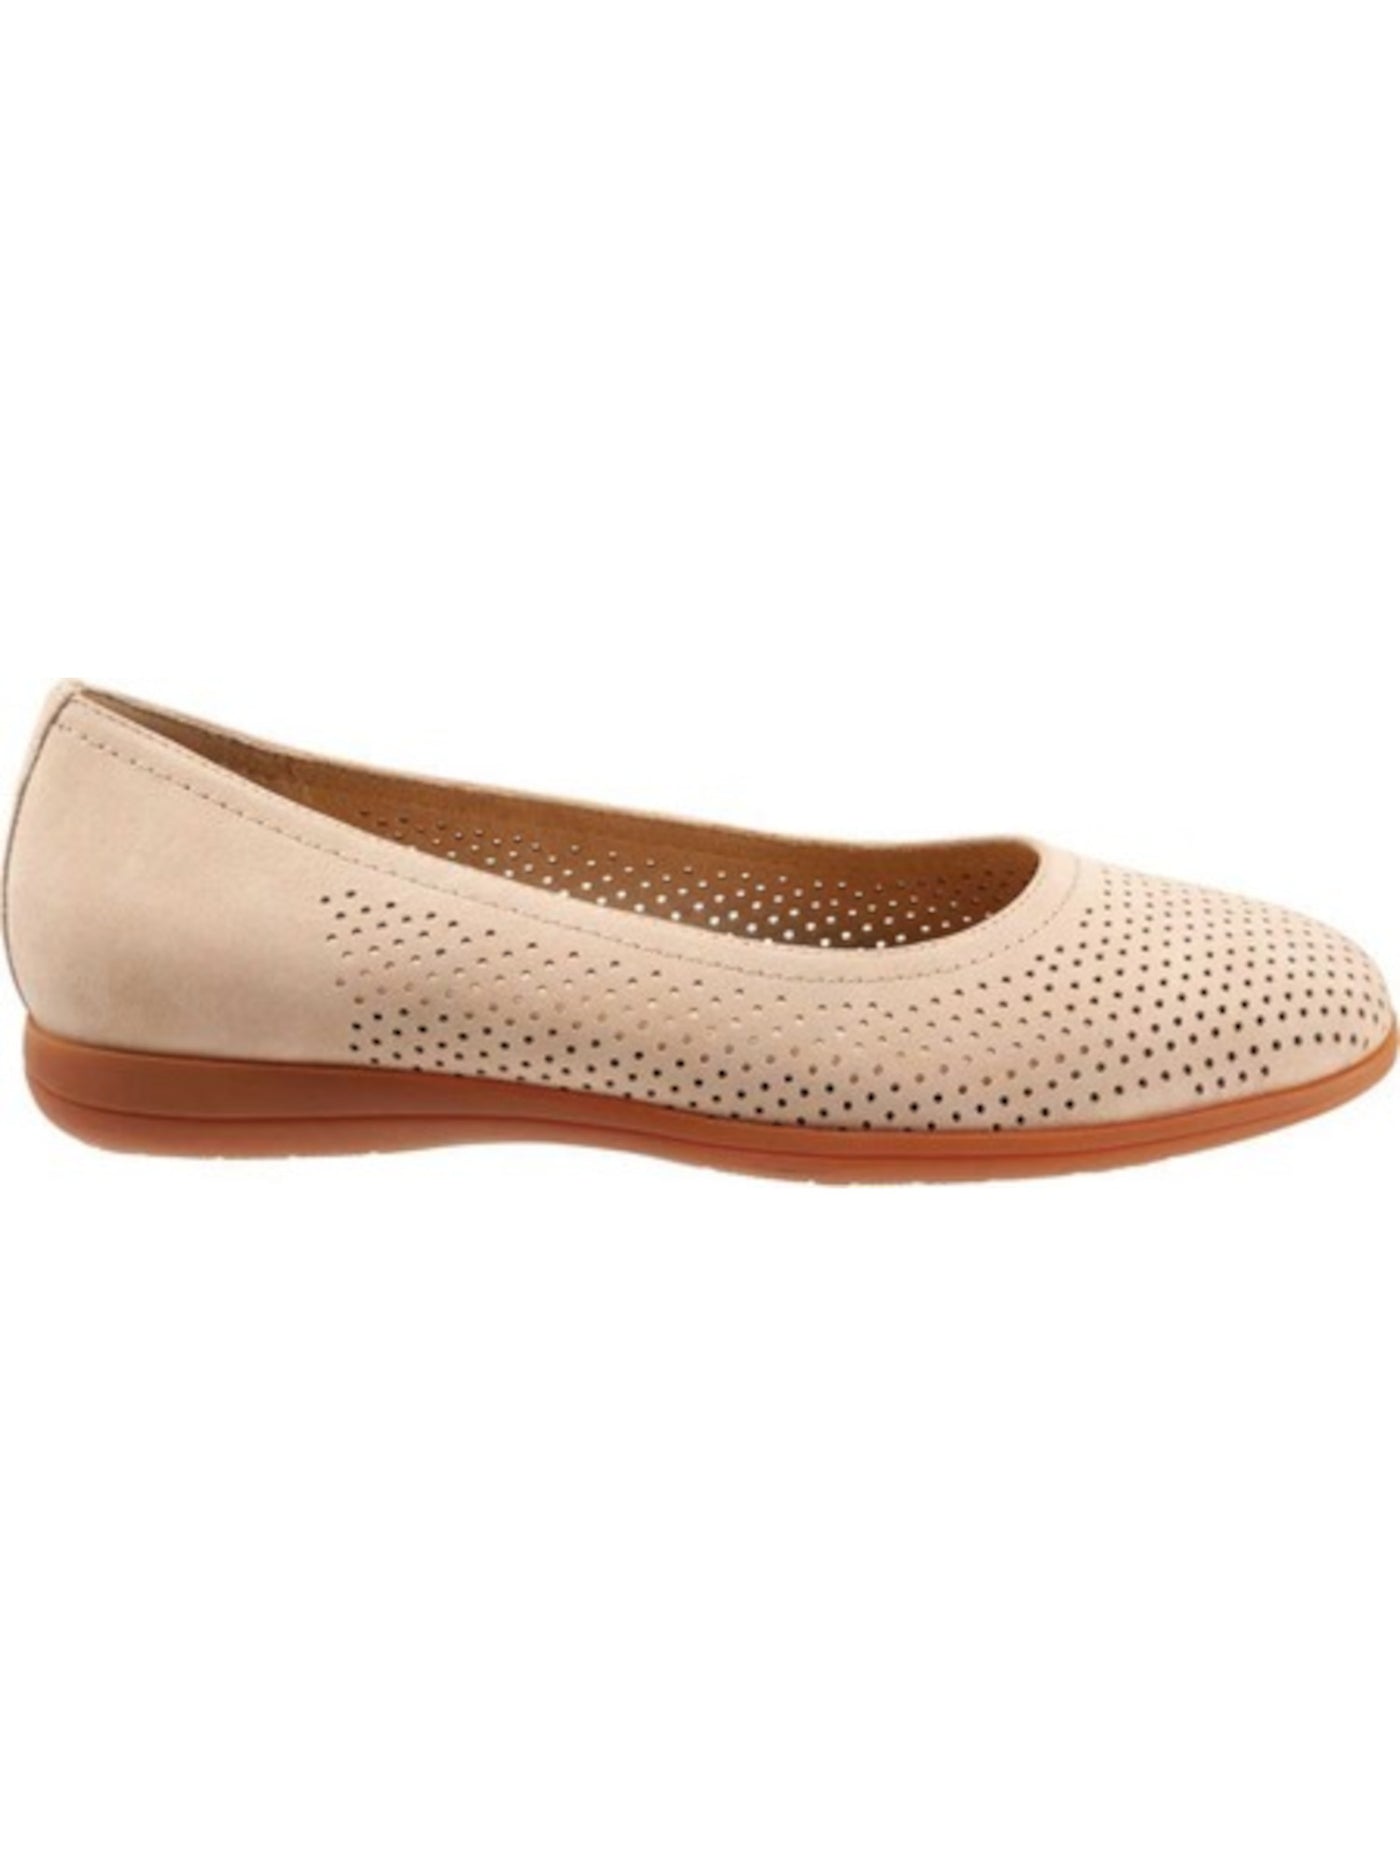 TROTTERS Womens Beige Perforated Removable Insole Cushioned Absorbs Impact Arch Support Non-Slip Darcey Round Toe Wedge Slip On Leather Ballet Flats 9.5 M